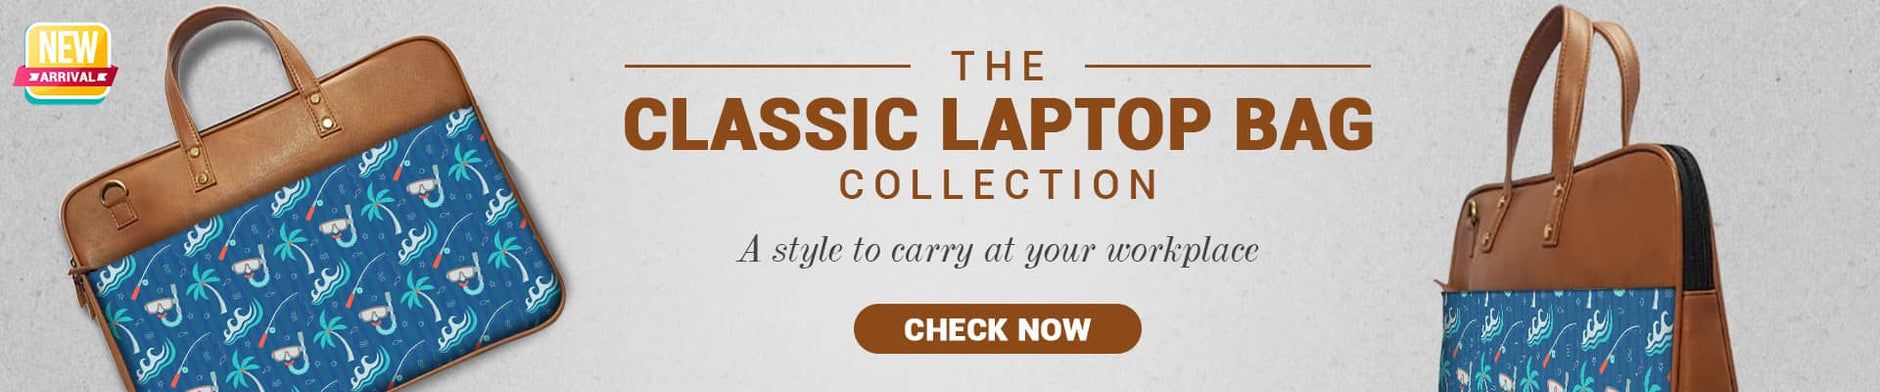 Vegan Leather Classic Laptop Bags Collection